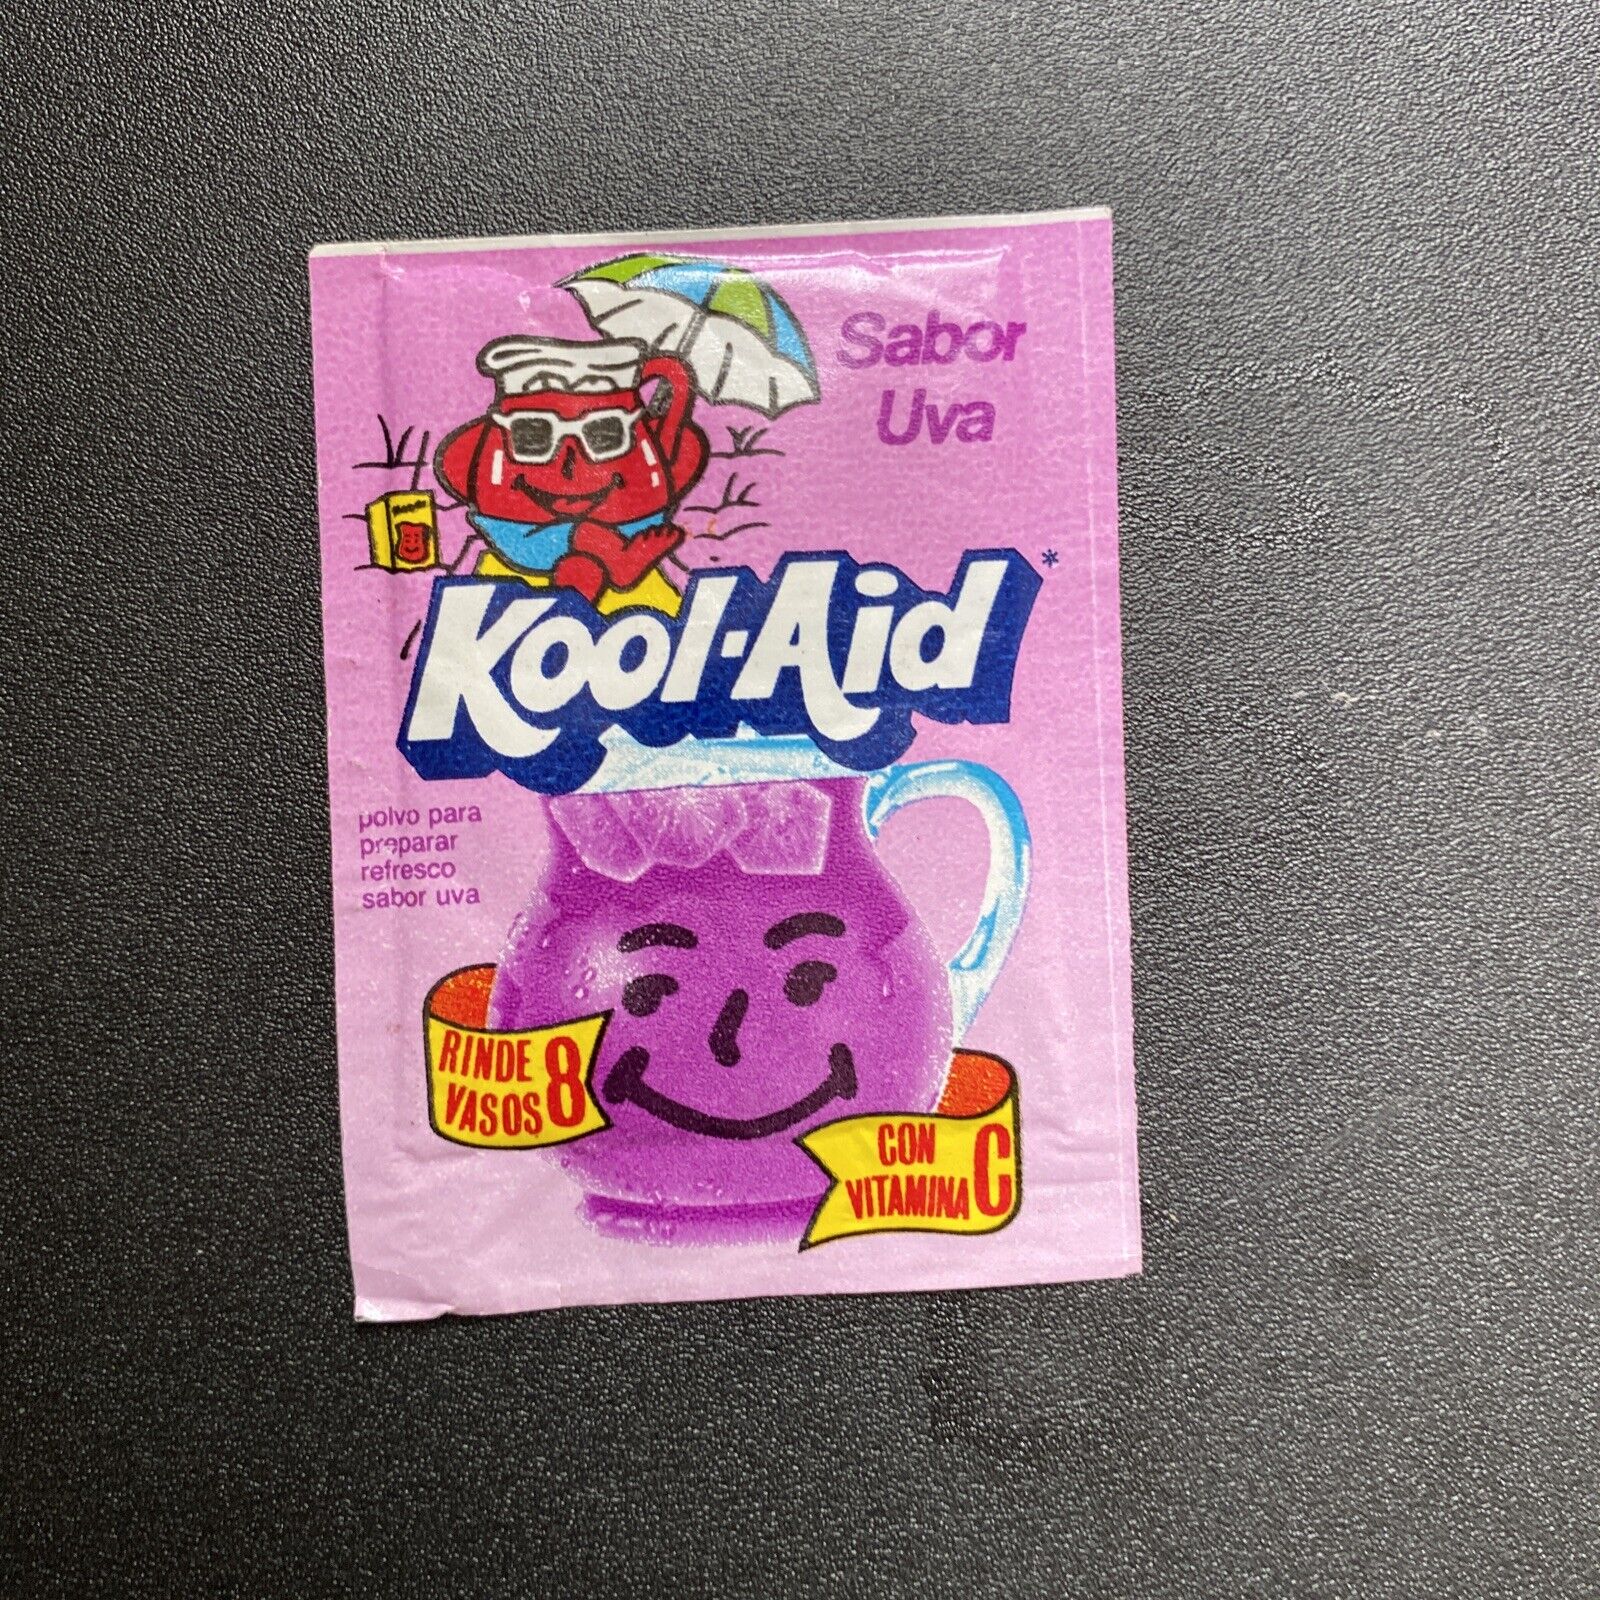 Extremely Rare Kool Aid Packet Mexico Vintage Grape Flavor